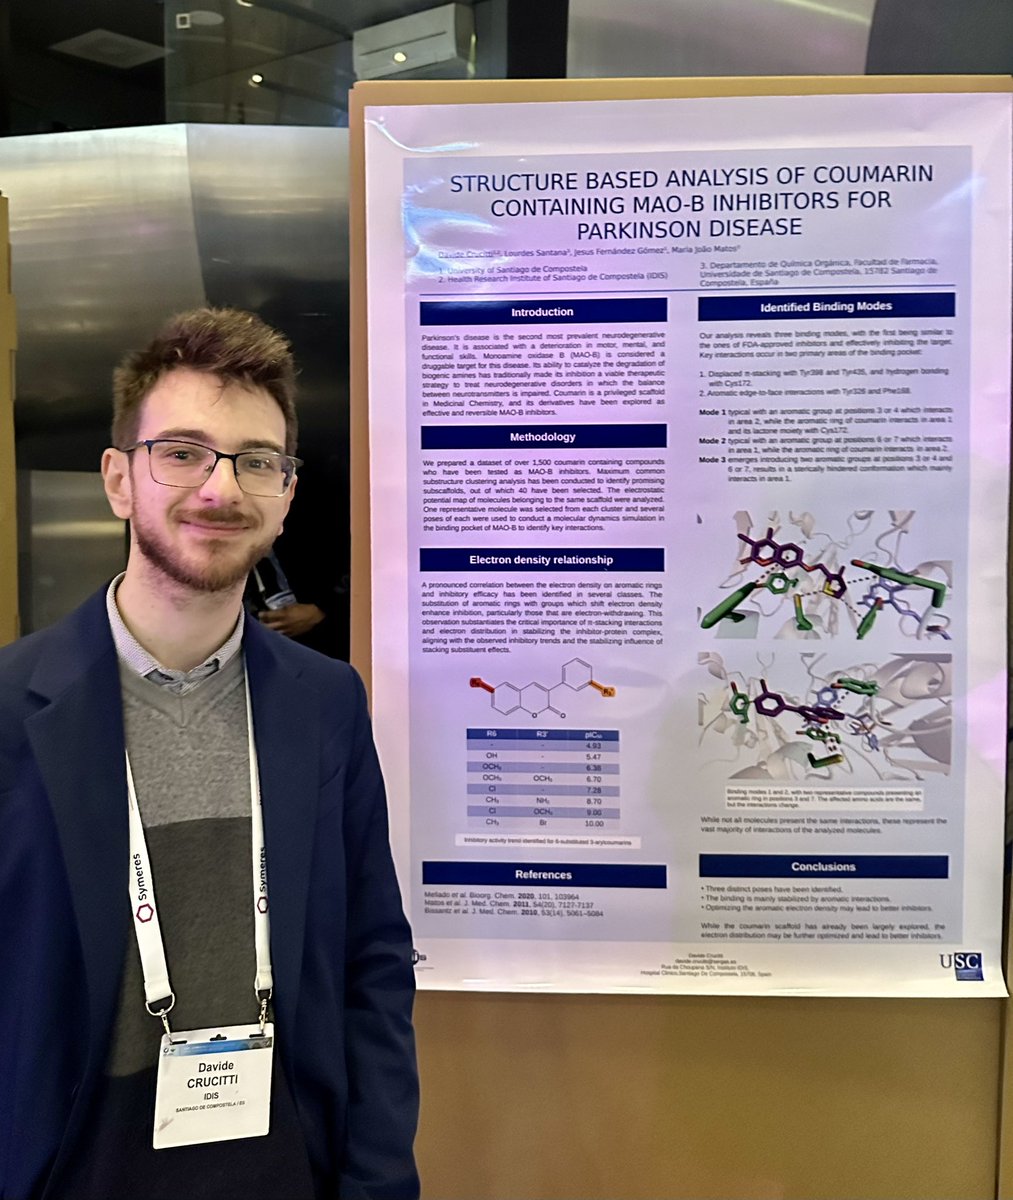 Davide Crucitti is presenting his poster “STRUCTURE BASED IDENTIFICATION OF NOVEL COUMARIN-CONTAINING MOLECULES FOR PARKINSON DISEASE” (P022) today at #MedChemFrontiers24  @EuroMedChem @AcsMedi @UniversidadeUSC @idis_research @Farmacia_USC